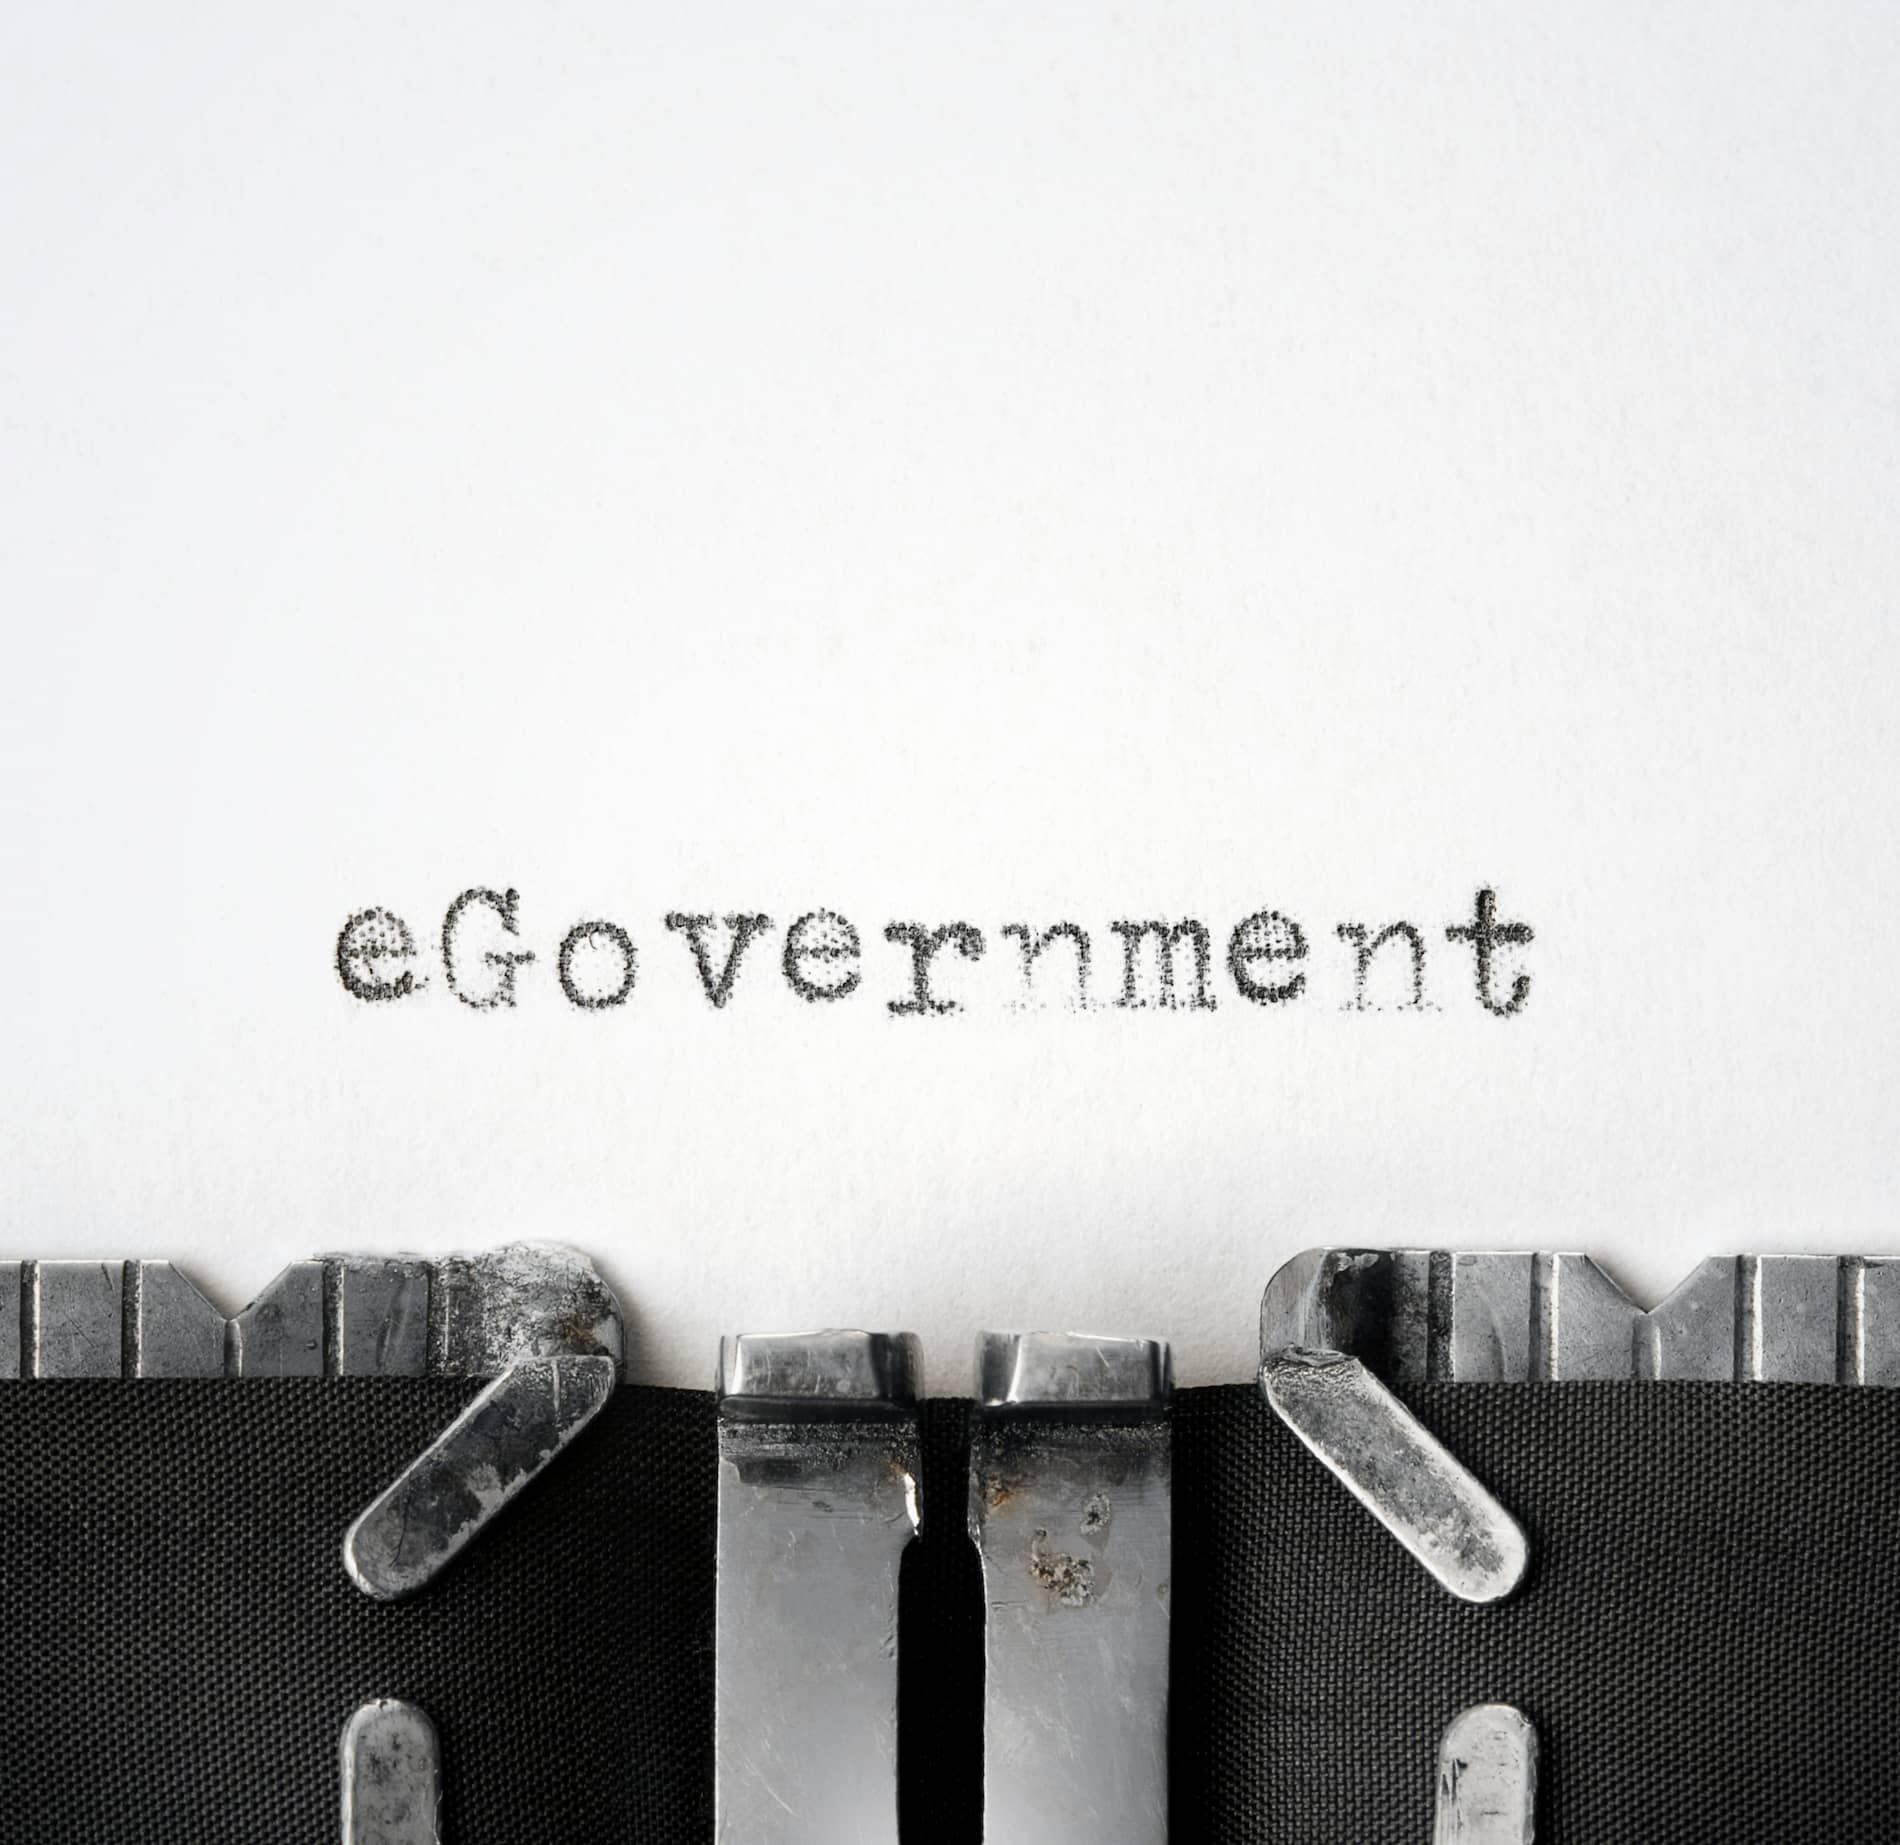 the word eGovernment on a white background